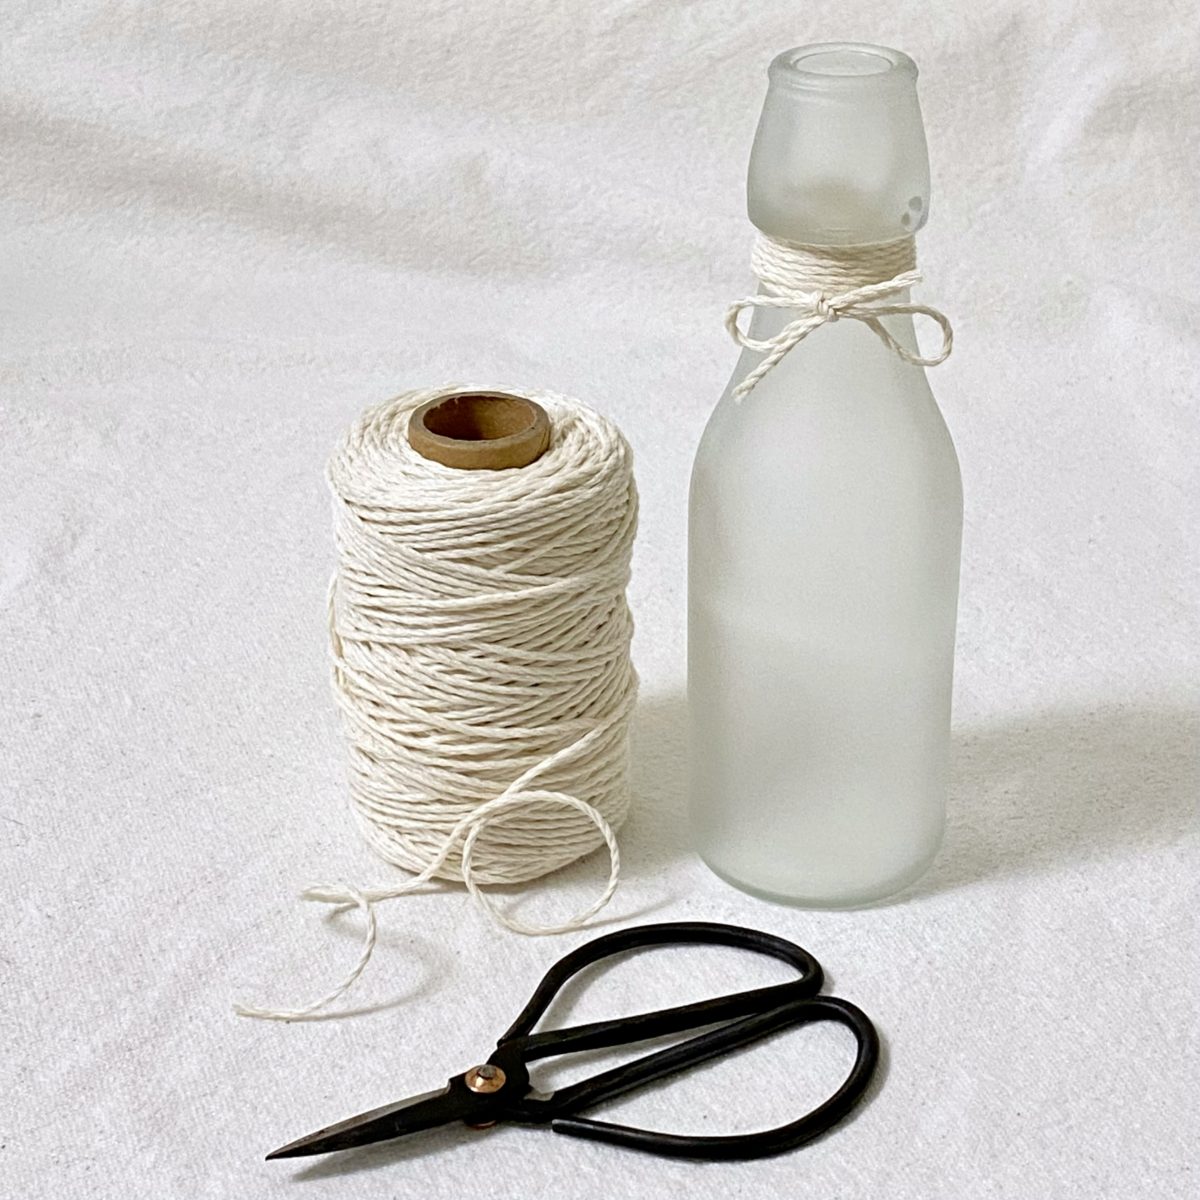 Frosted glass bottle next to a spool of string and a scissor.